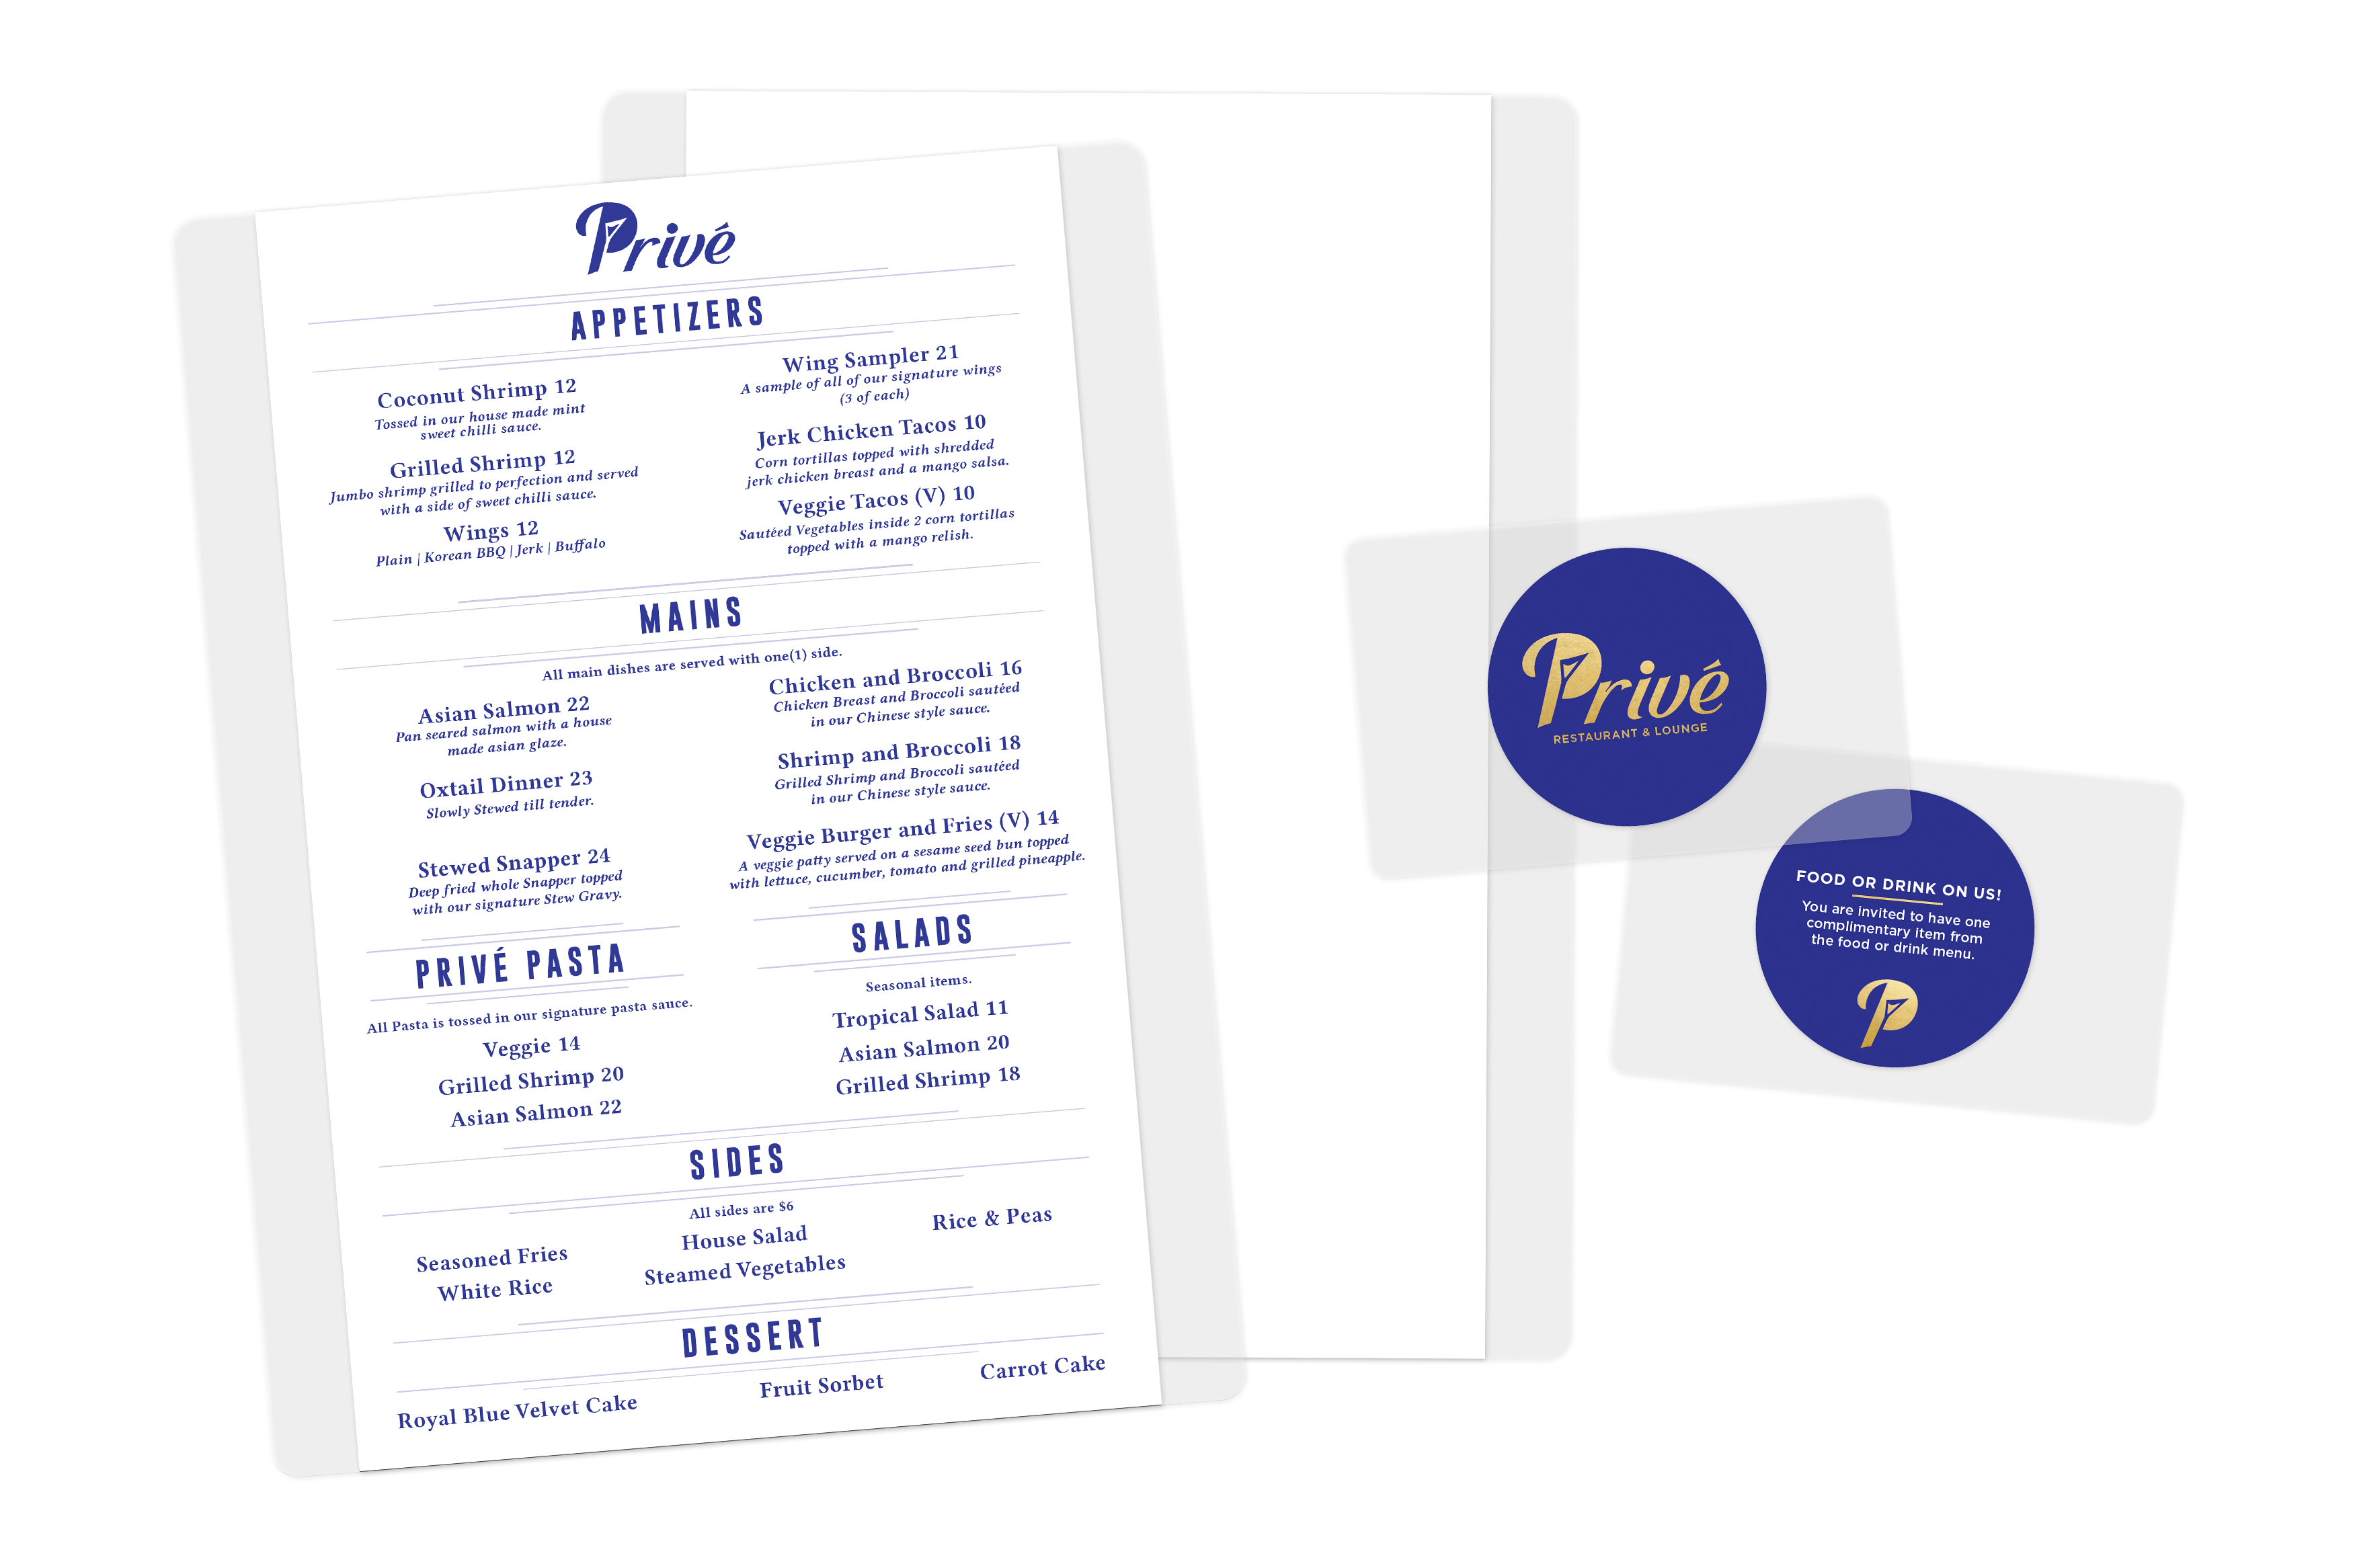 Clear Menu and Promo Card for Prive Lounge